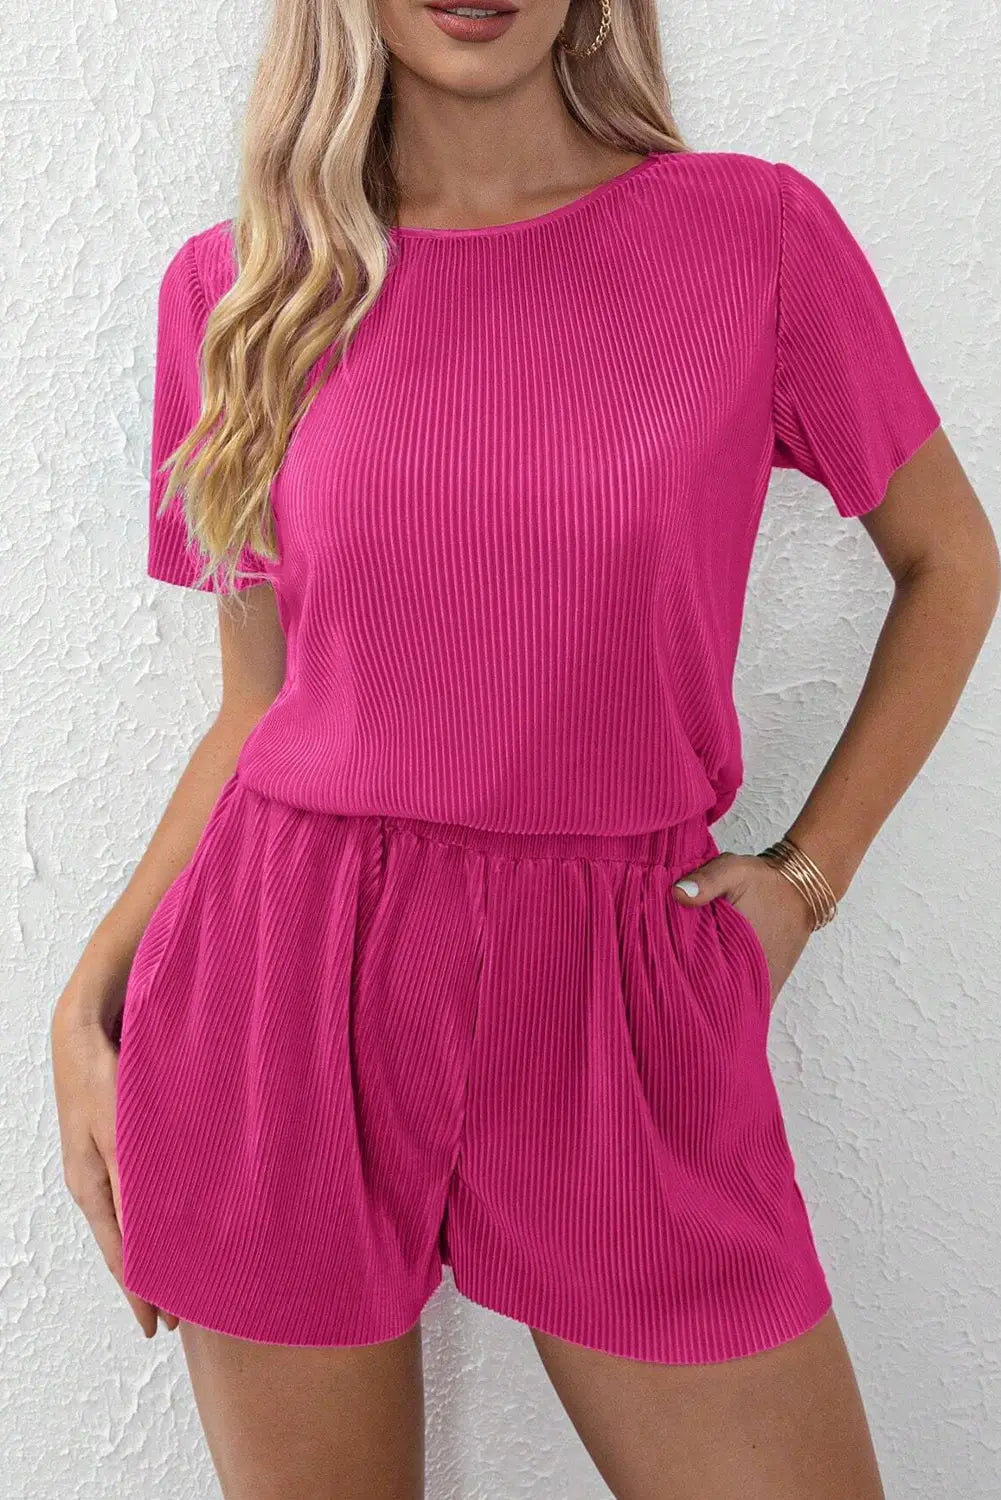 Casual pleated shorts matching set - bright pink / s / 100% polyester - two piece sets